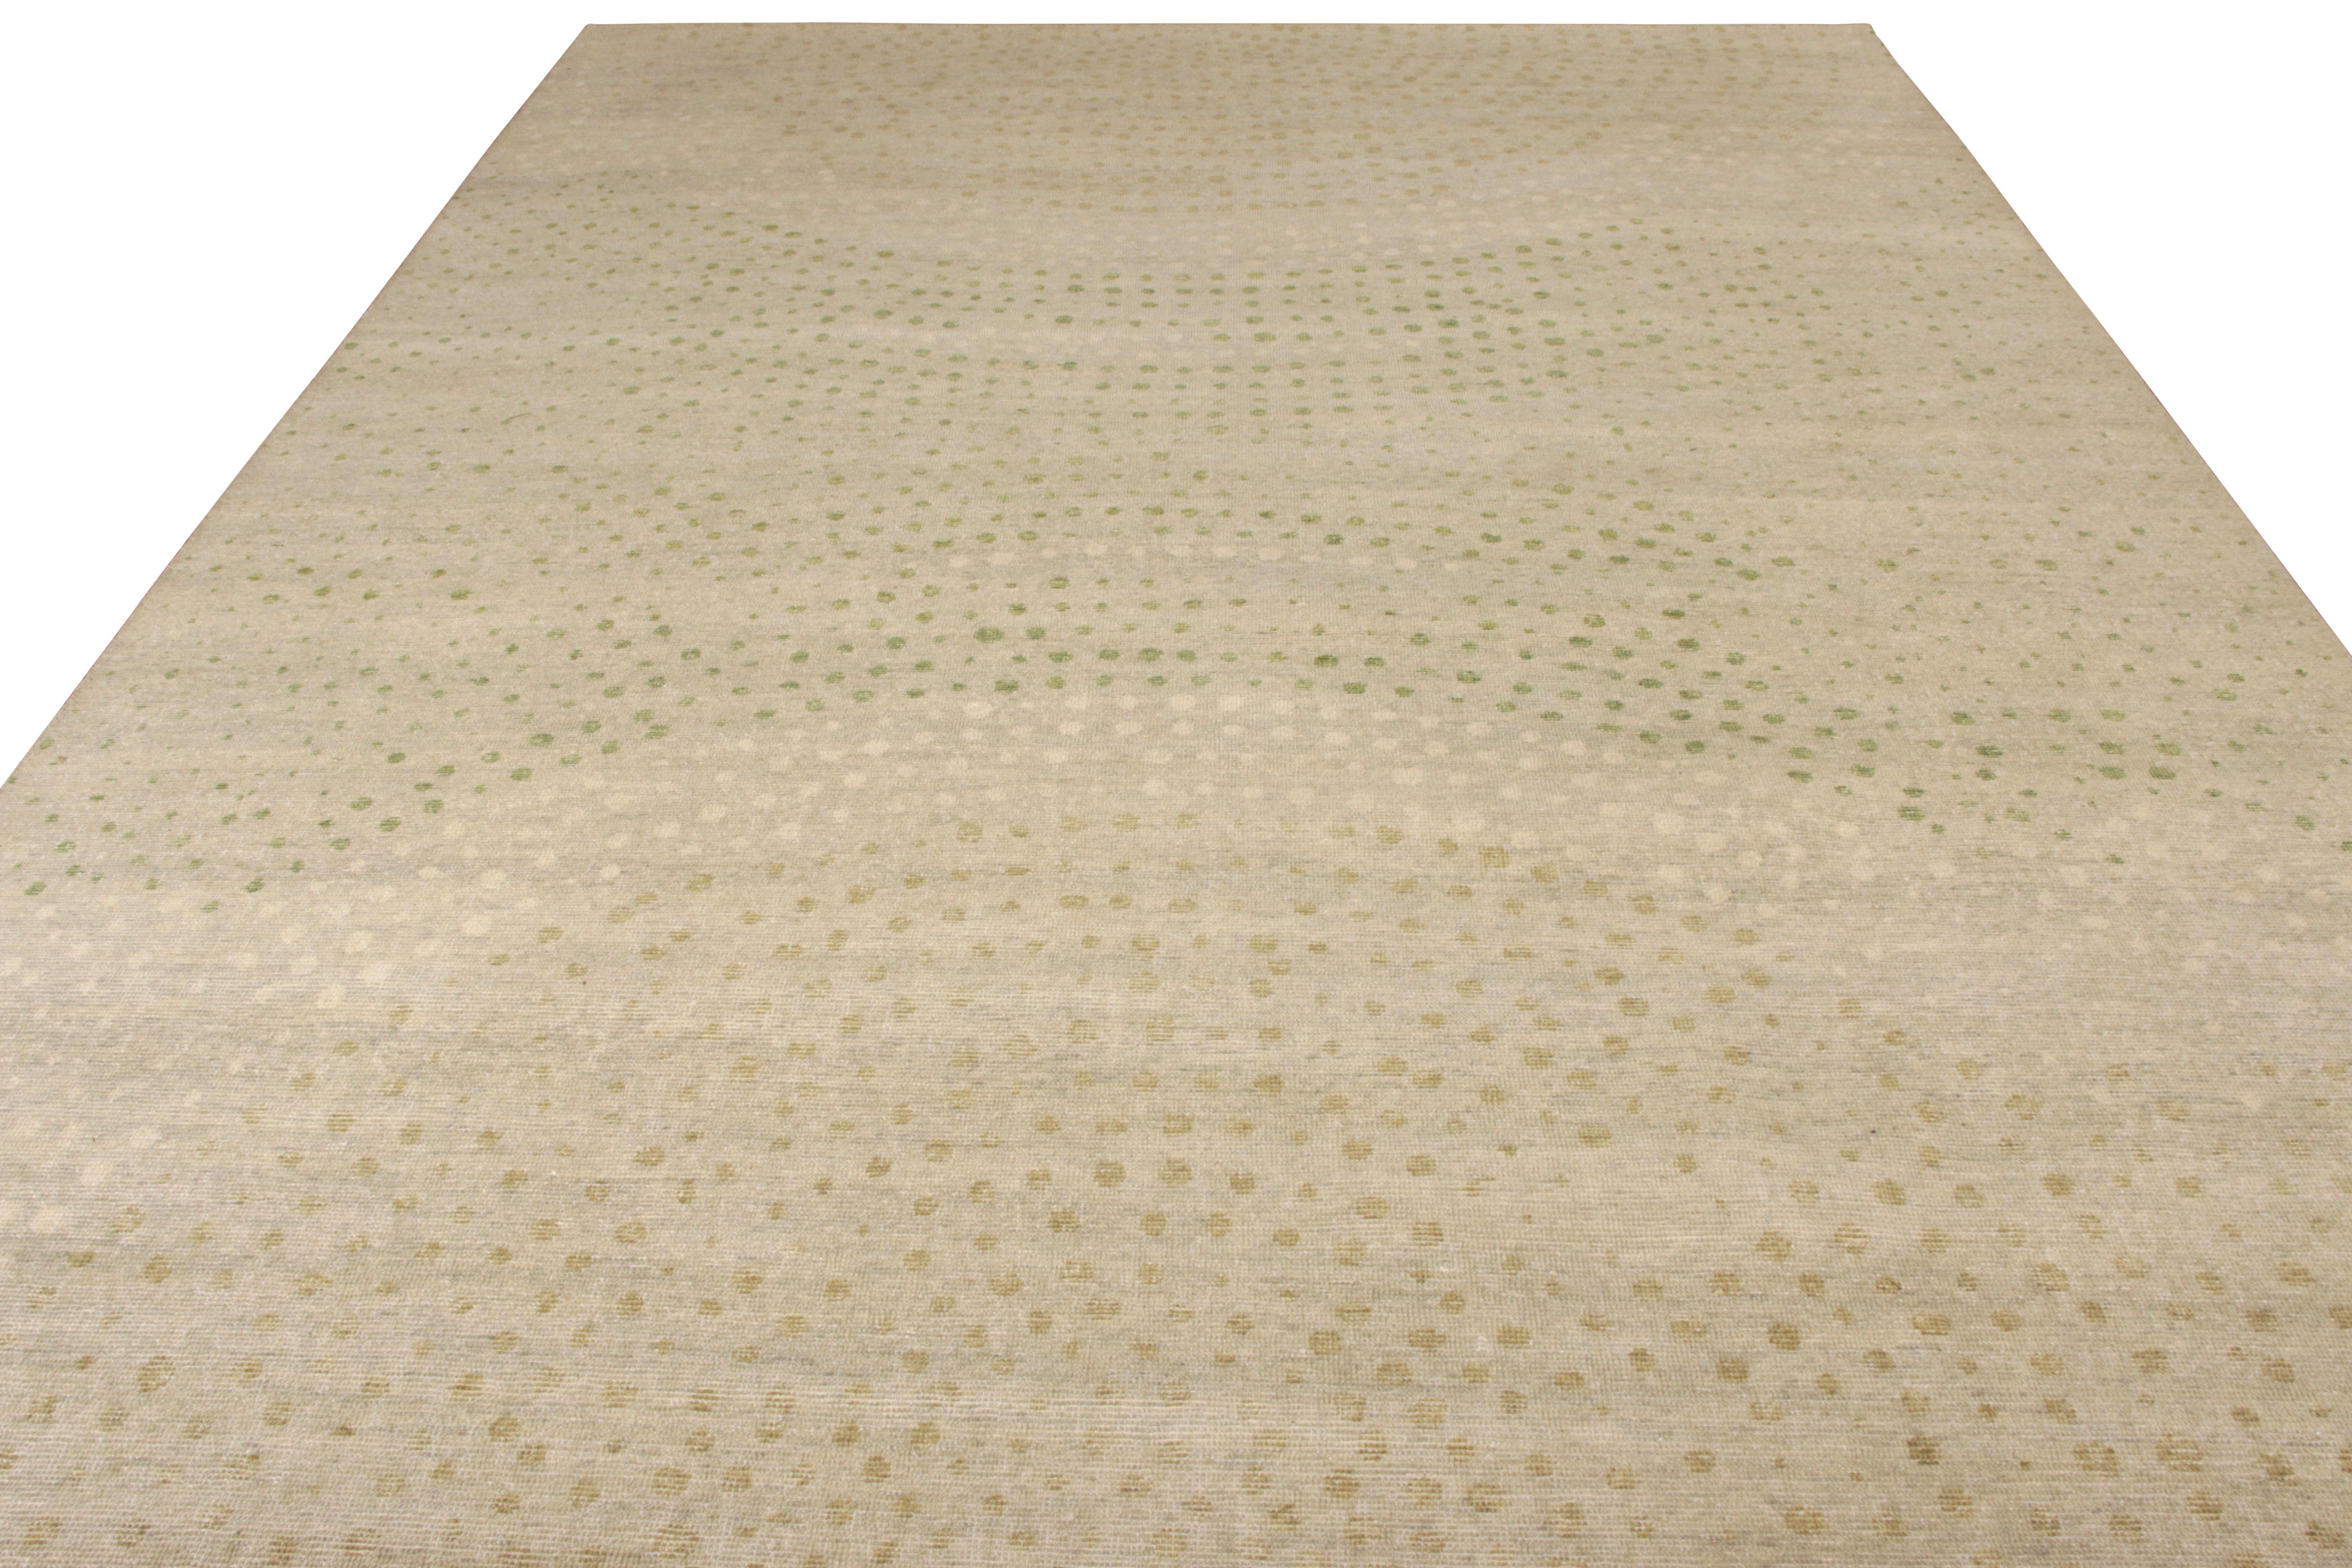 Redefining the language of style, Rug & Kilim presents a distinguished 9 x 12 addition to the Homage Collection. Hand knotted in wool, an engaging piece from the work of Nikita Nagpal in our signature dot pattern styles sits fabulously in green and